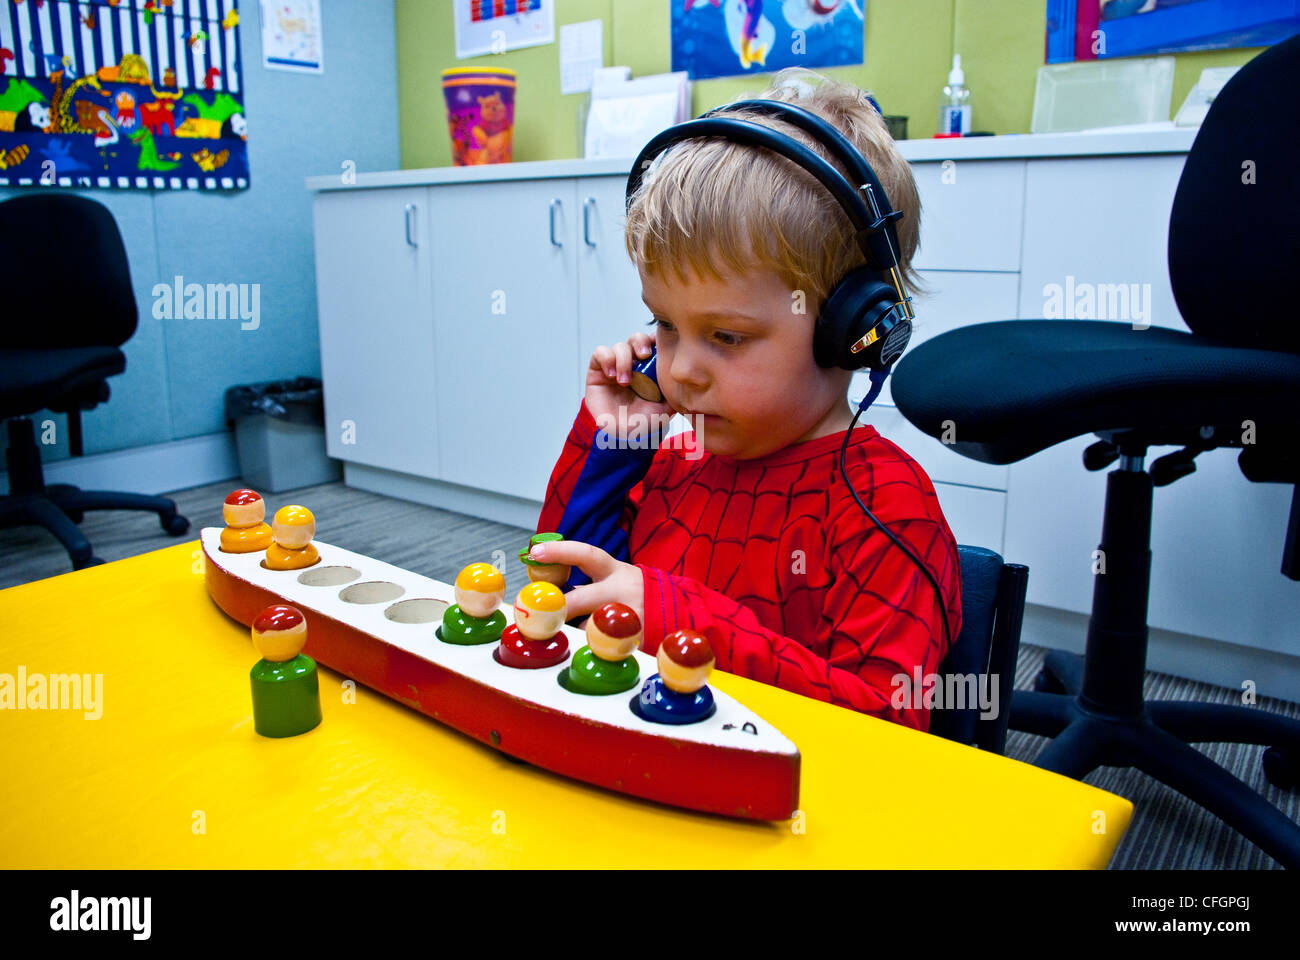 A boy undergoes a clinical hearing test using headphones and toys. Stock Photo